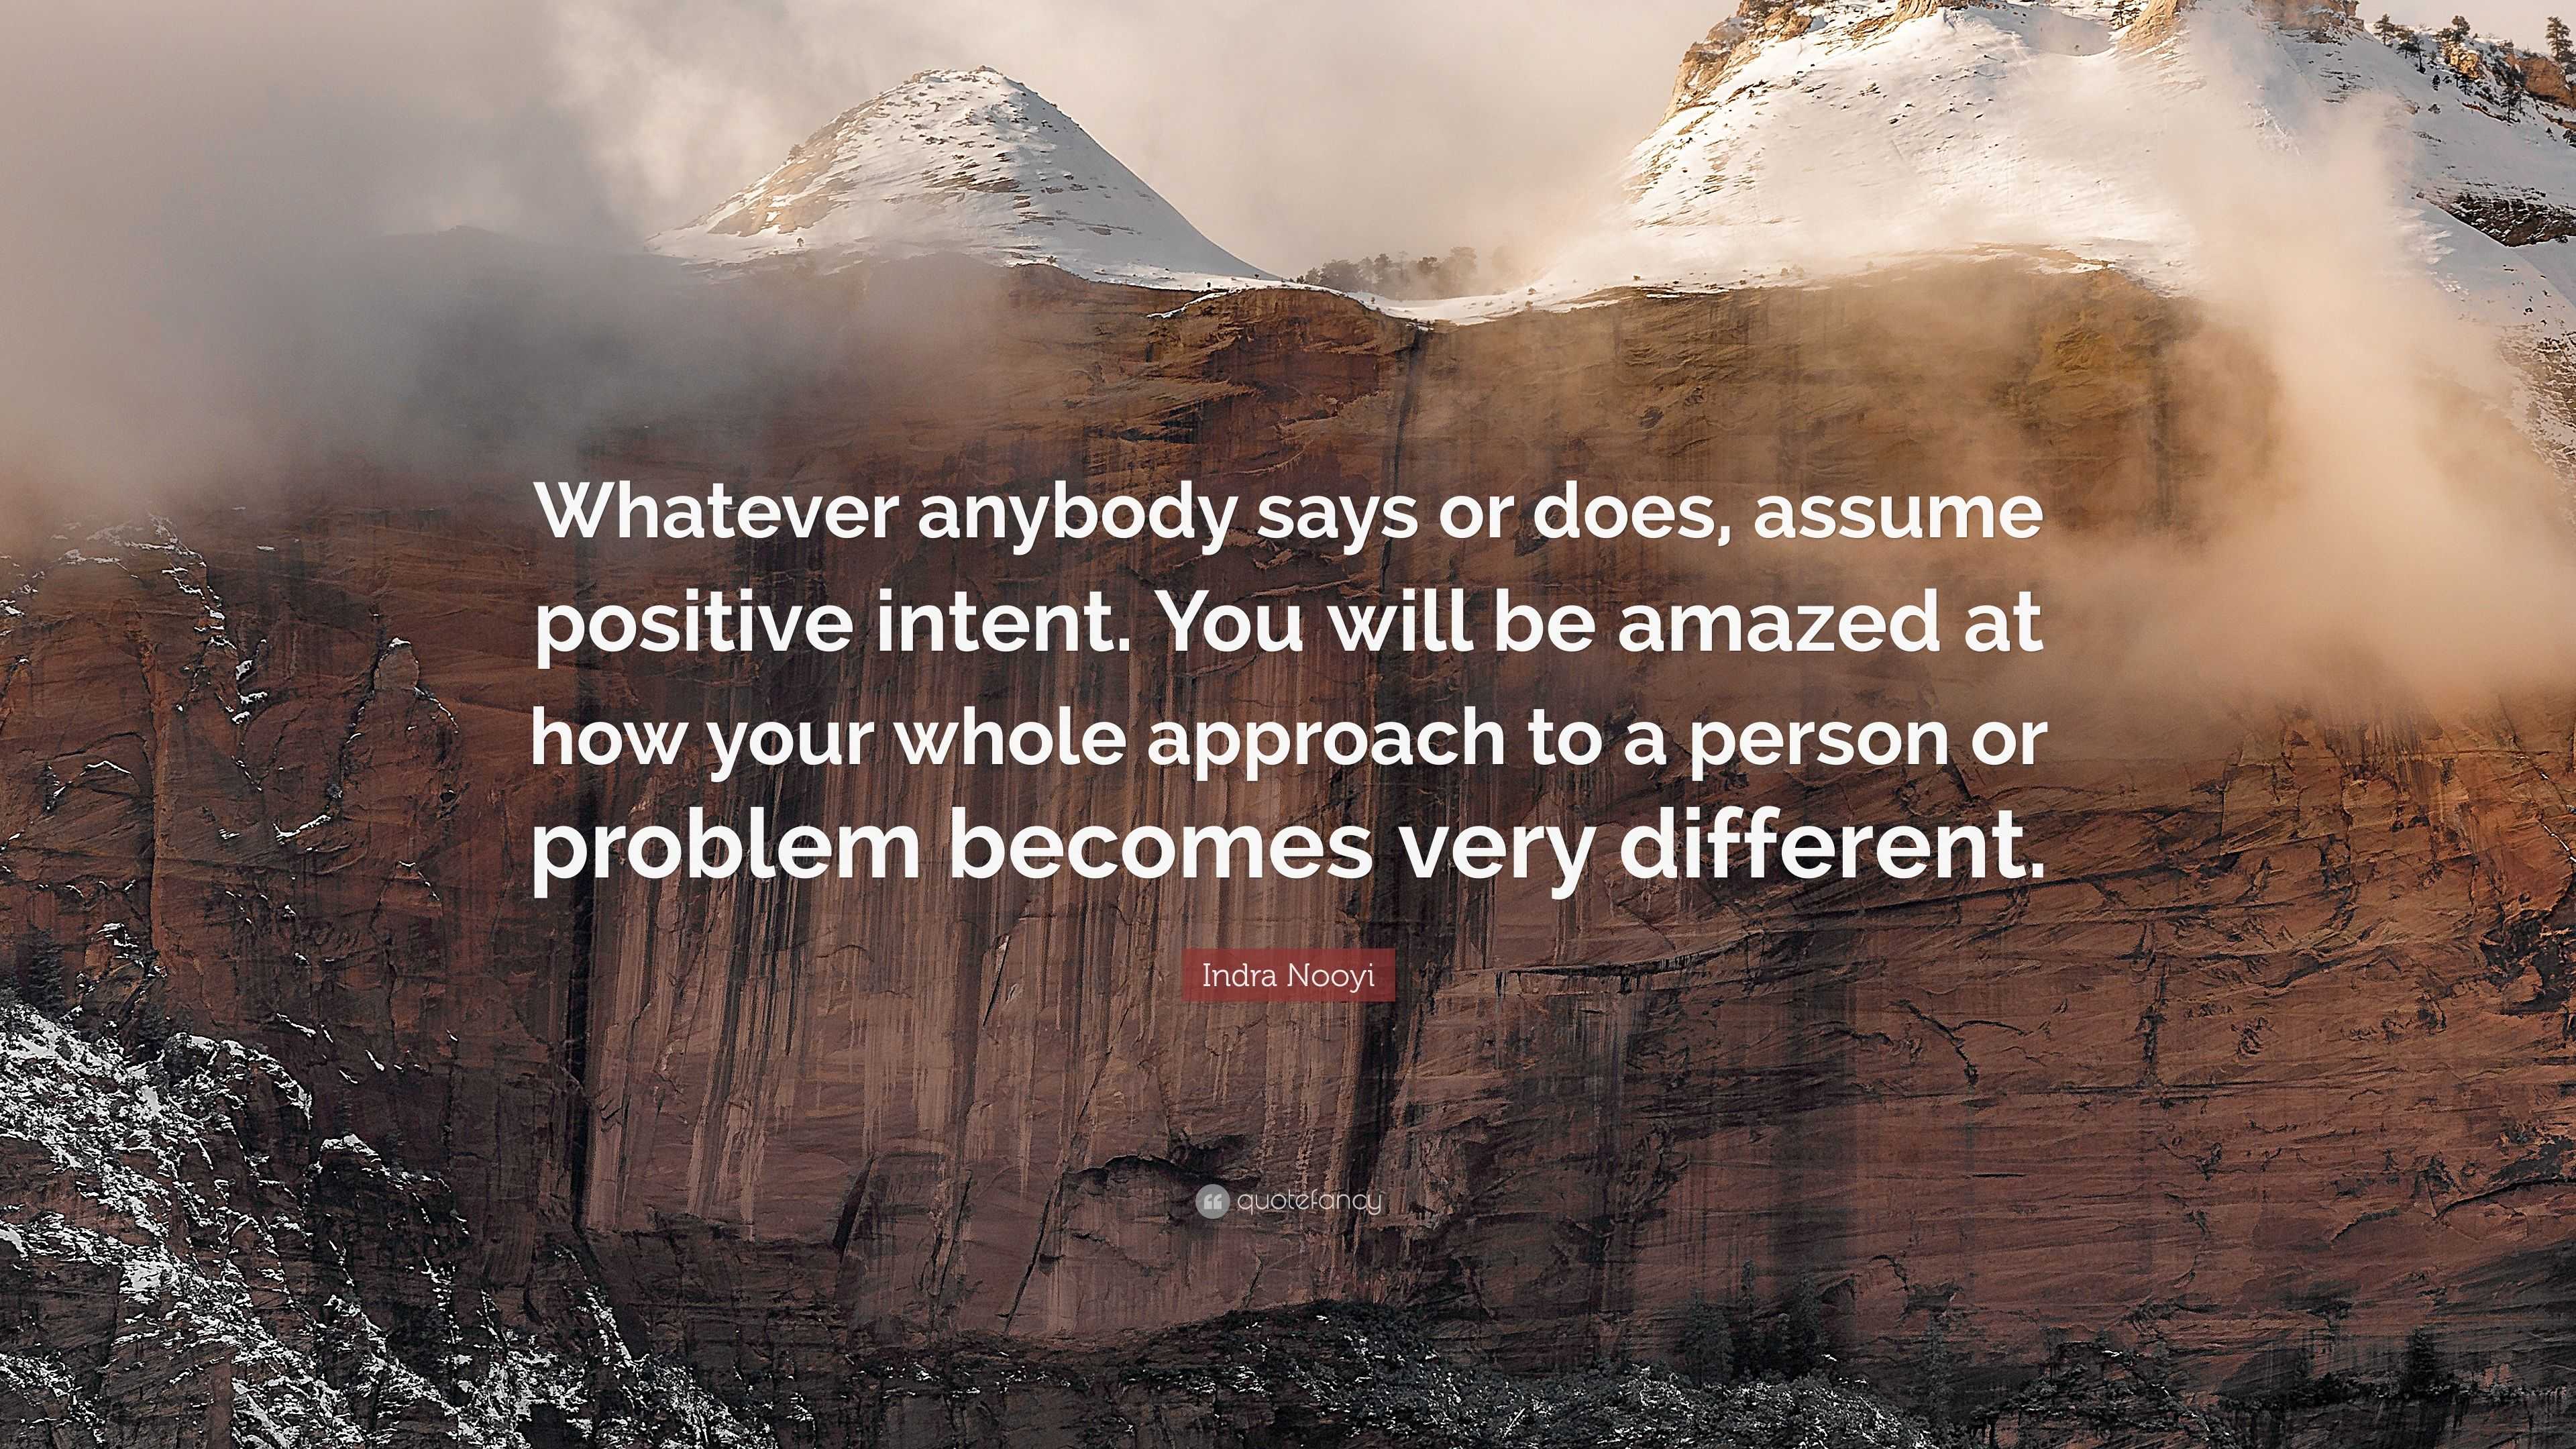 Indra Nooyi Quote: “Whatever anybody says or does, assume positive